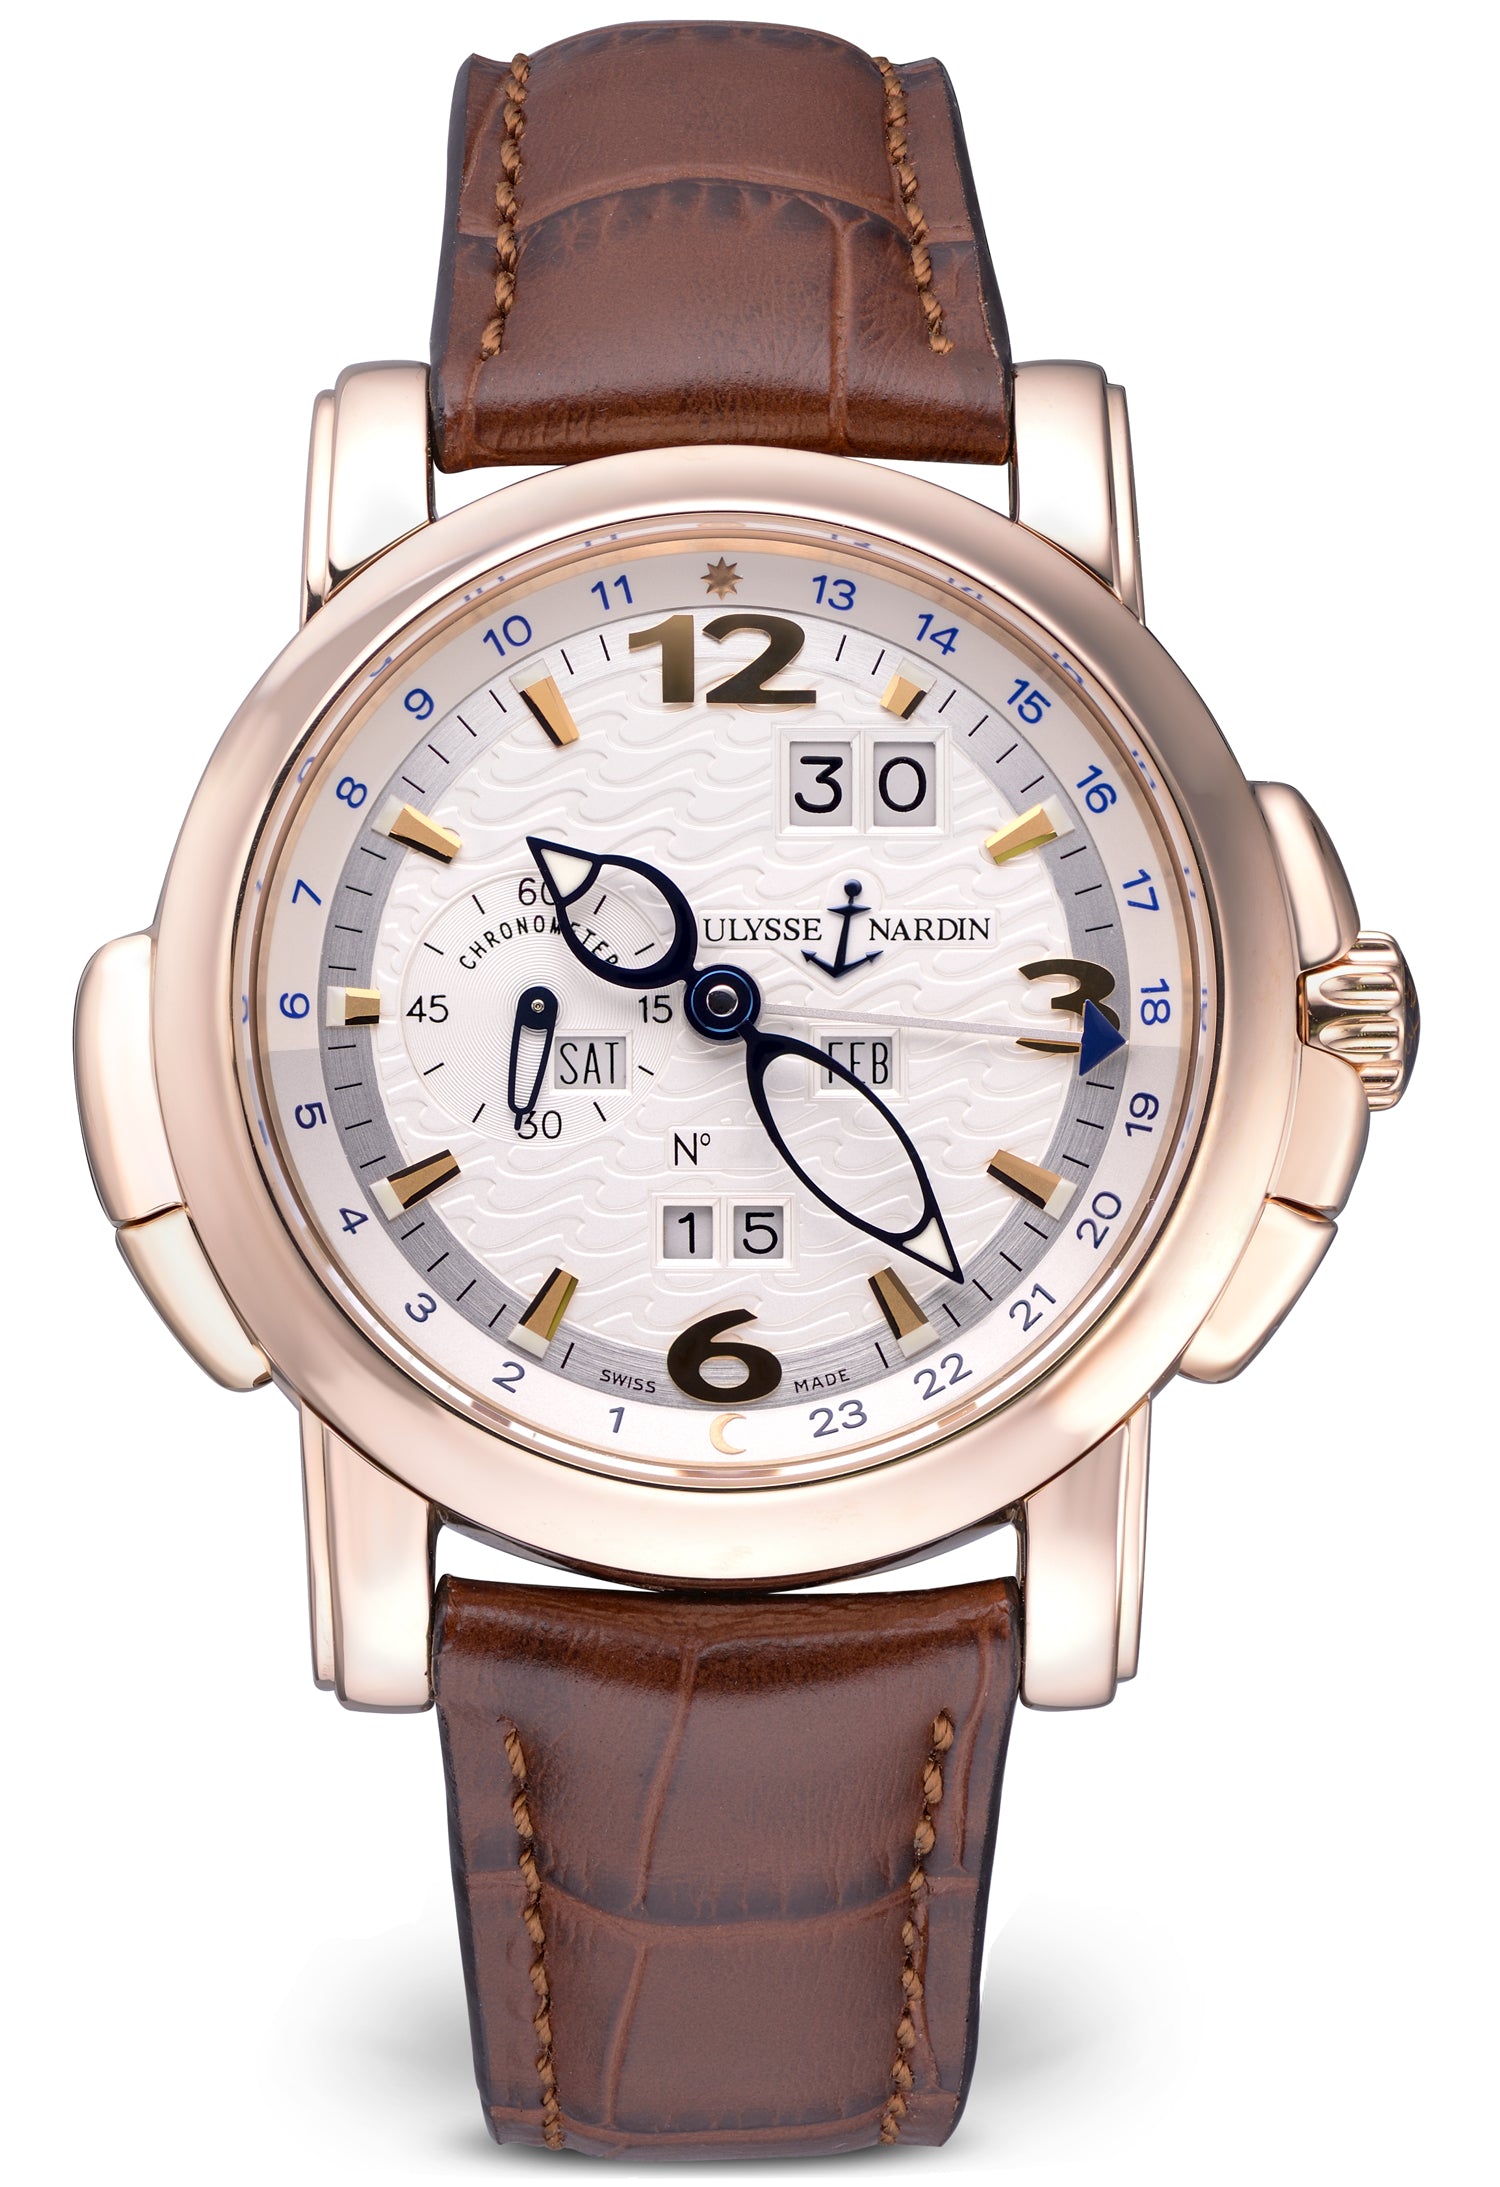 Ulysse Nardin GMT Perpetual Limited Edition 18K Rose Gold Men's Watch